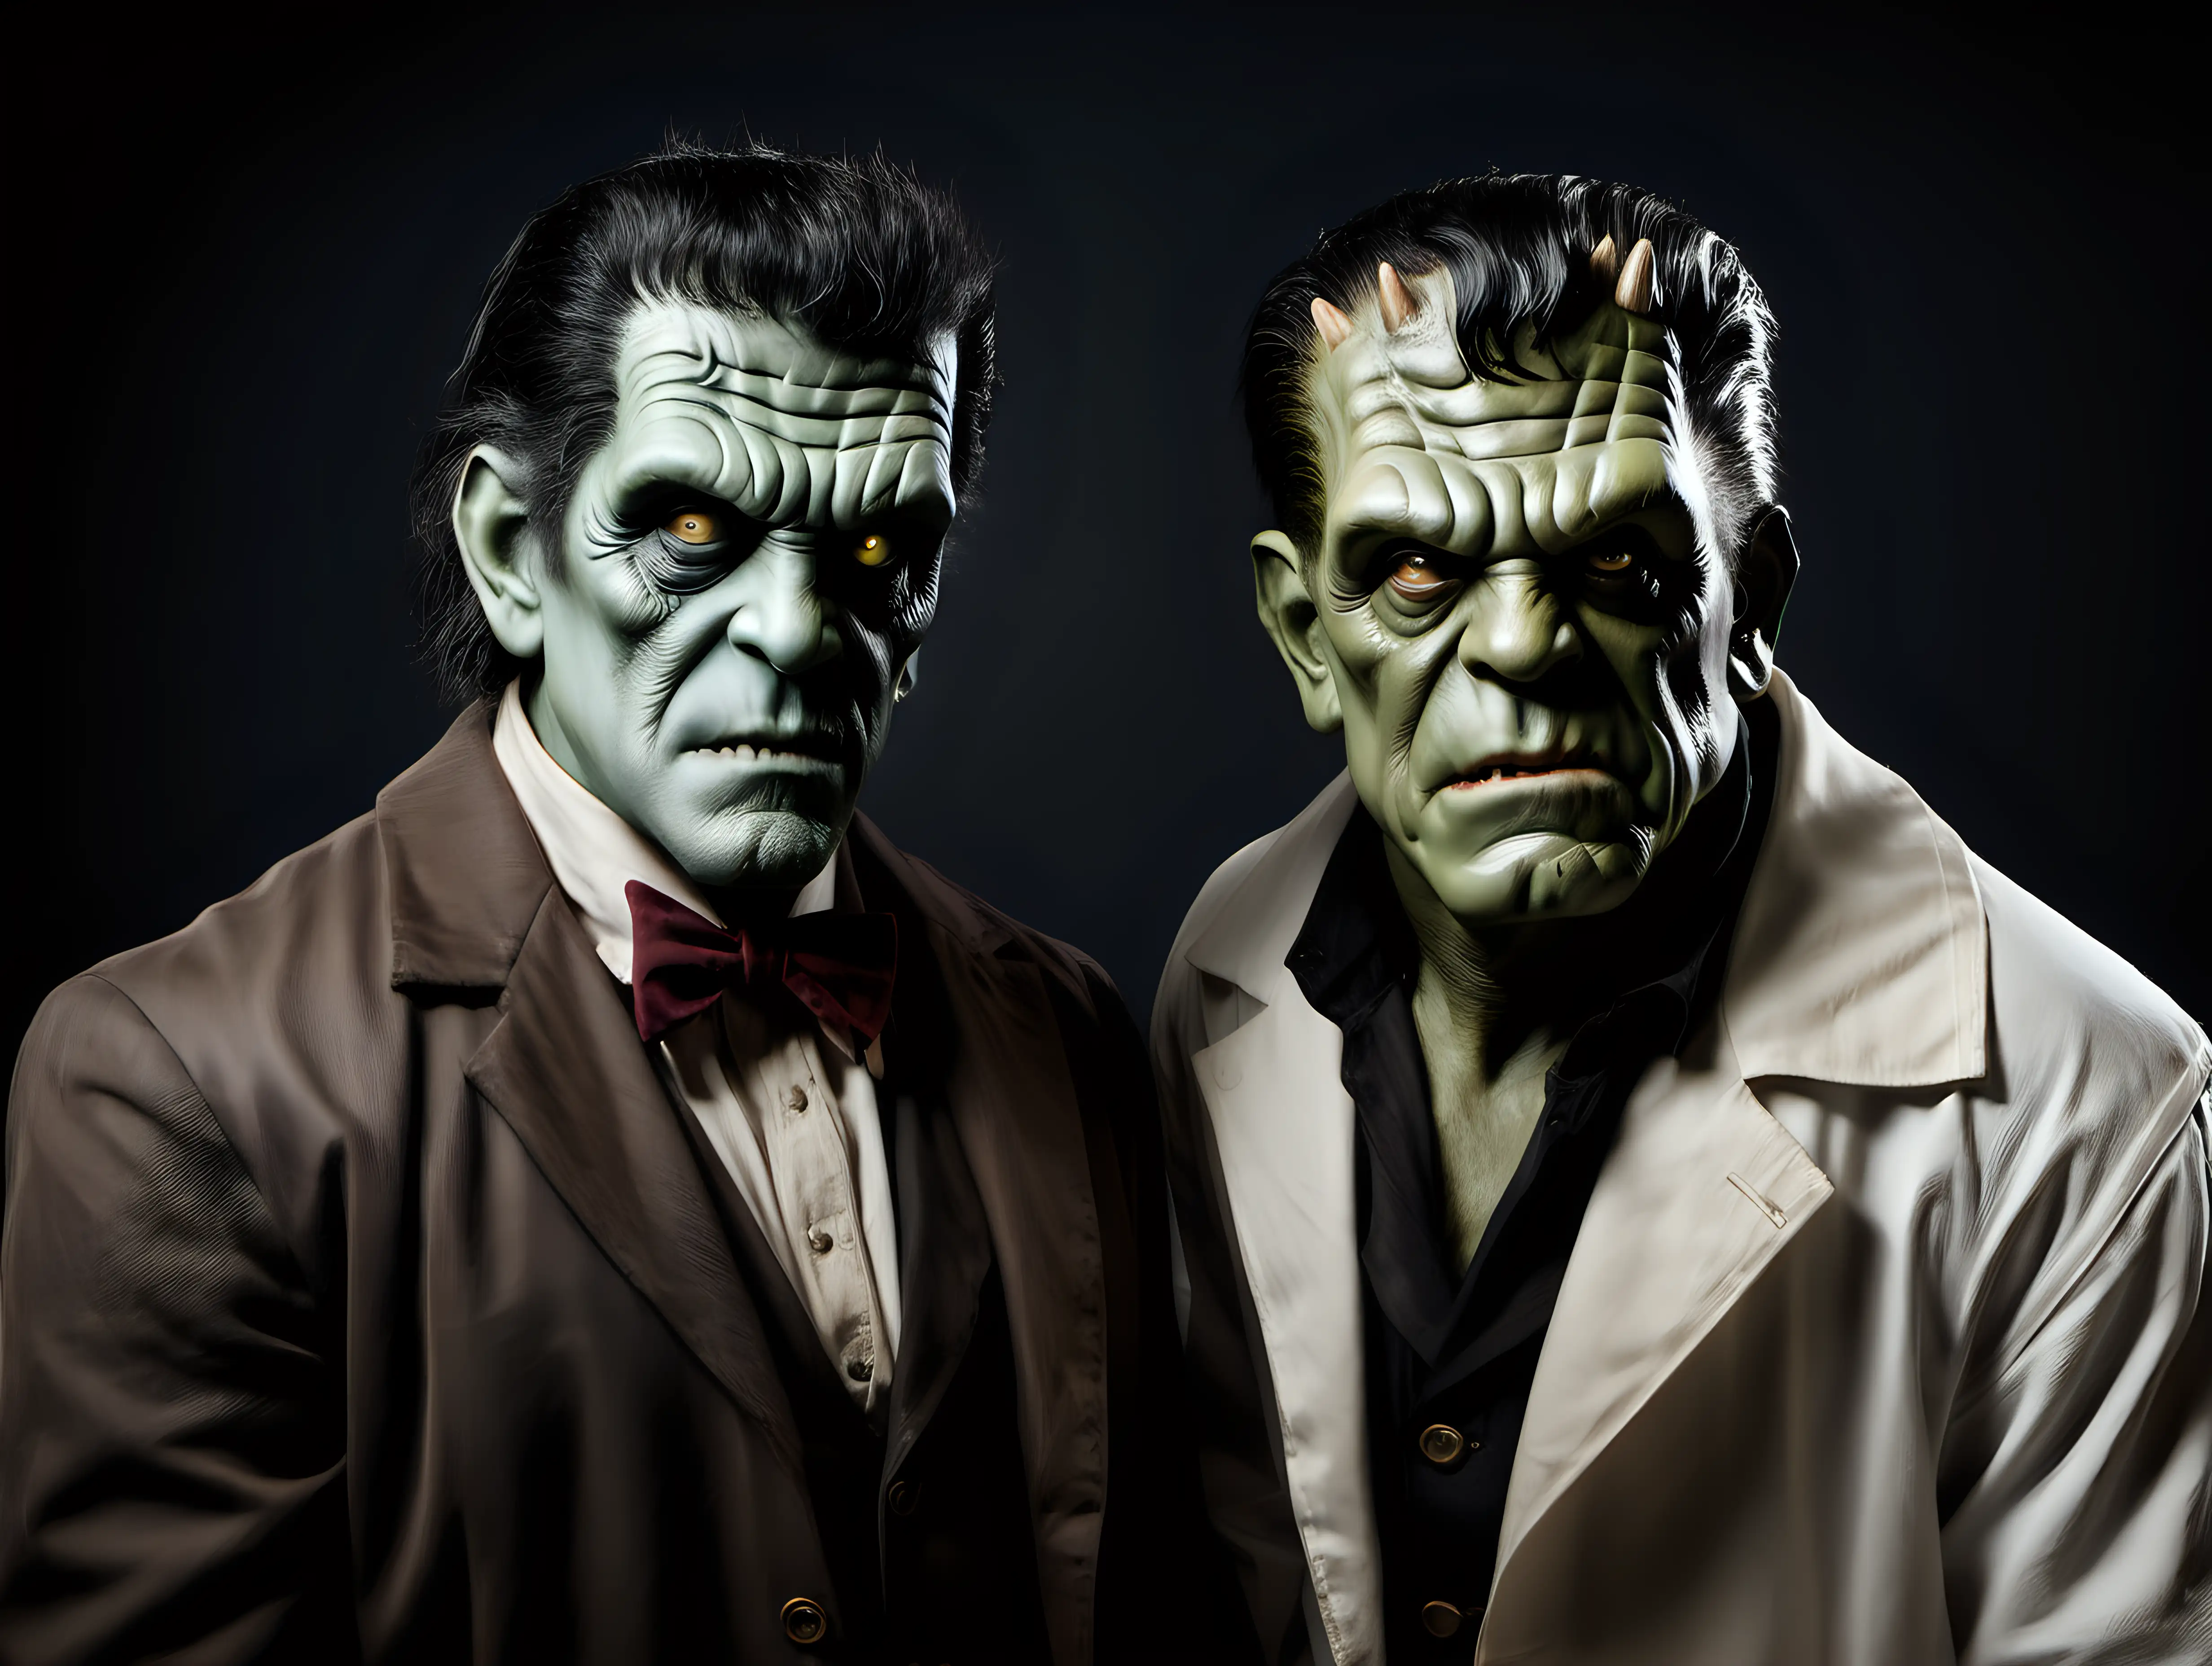 Wolfman and Frankenstein photographed in a portrait studio